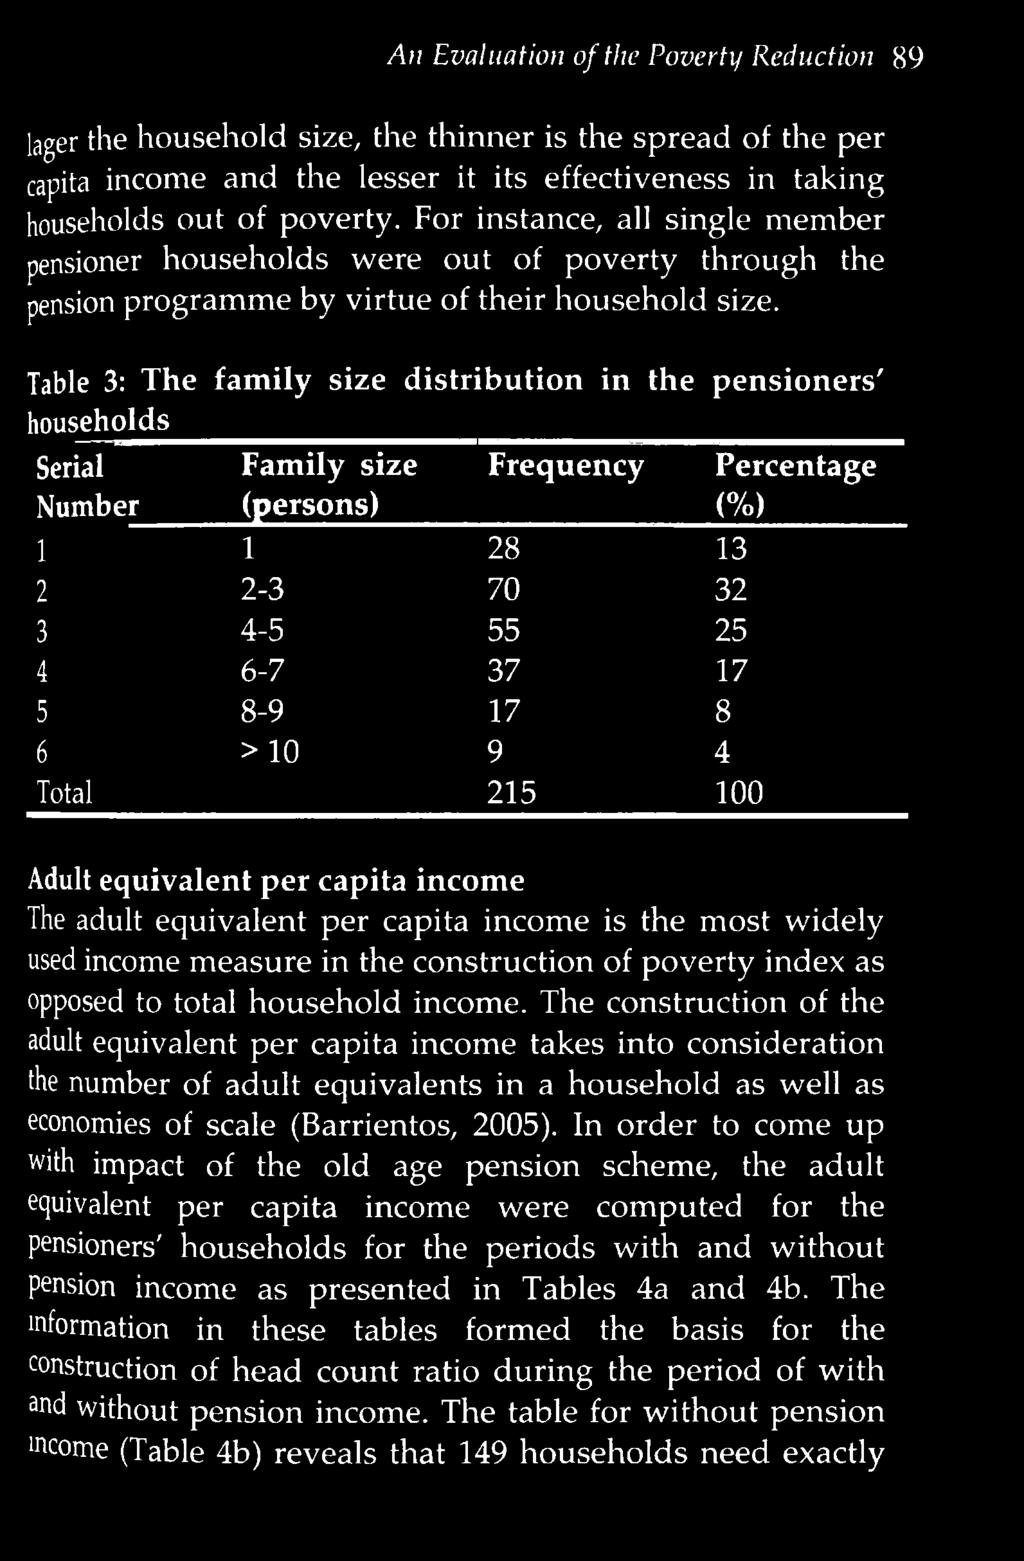 incom e. The construction of the adult equivalent per capita incom e takes into consideration the number of adult equivalents in a household as well as economies of scale (Barrientos, 2005).